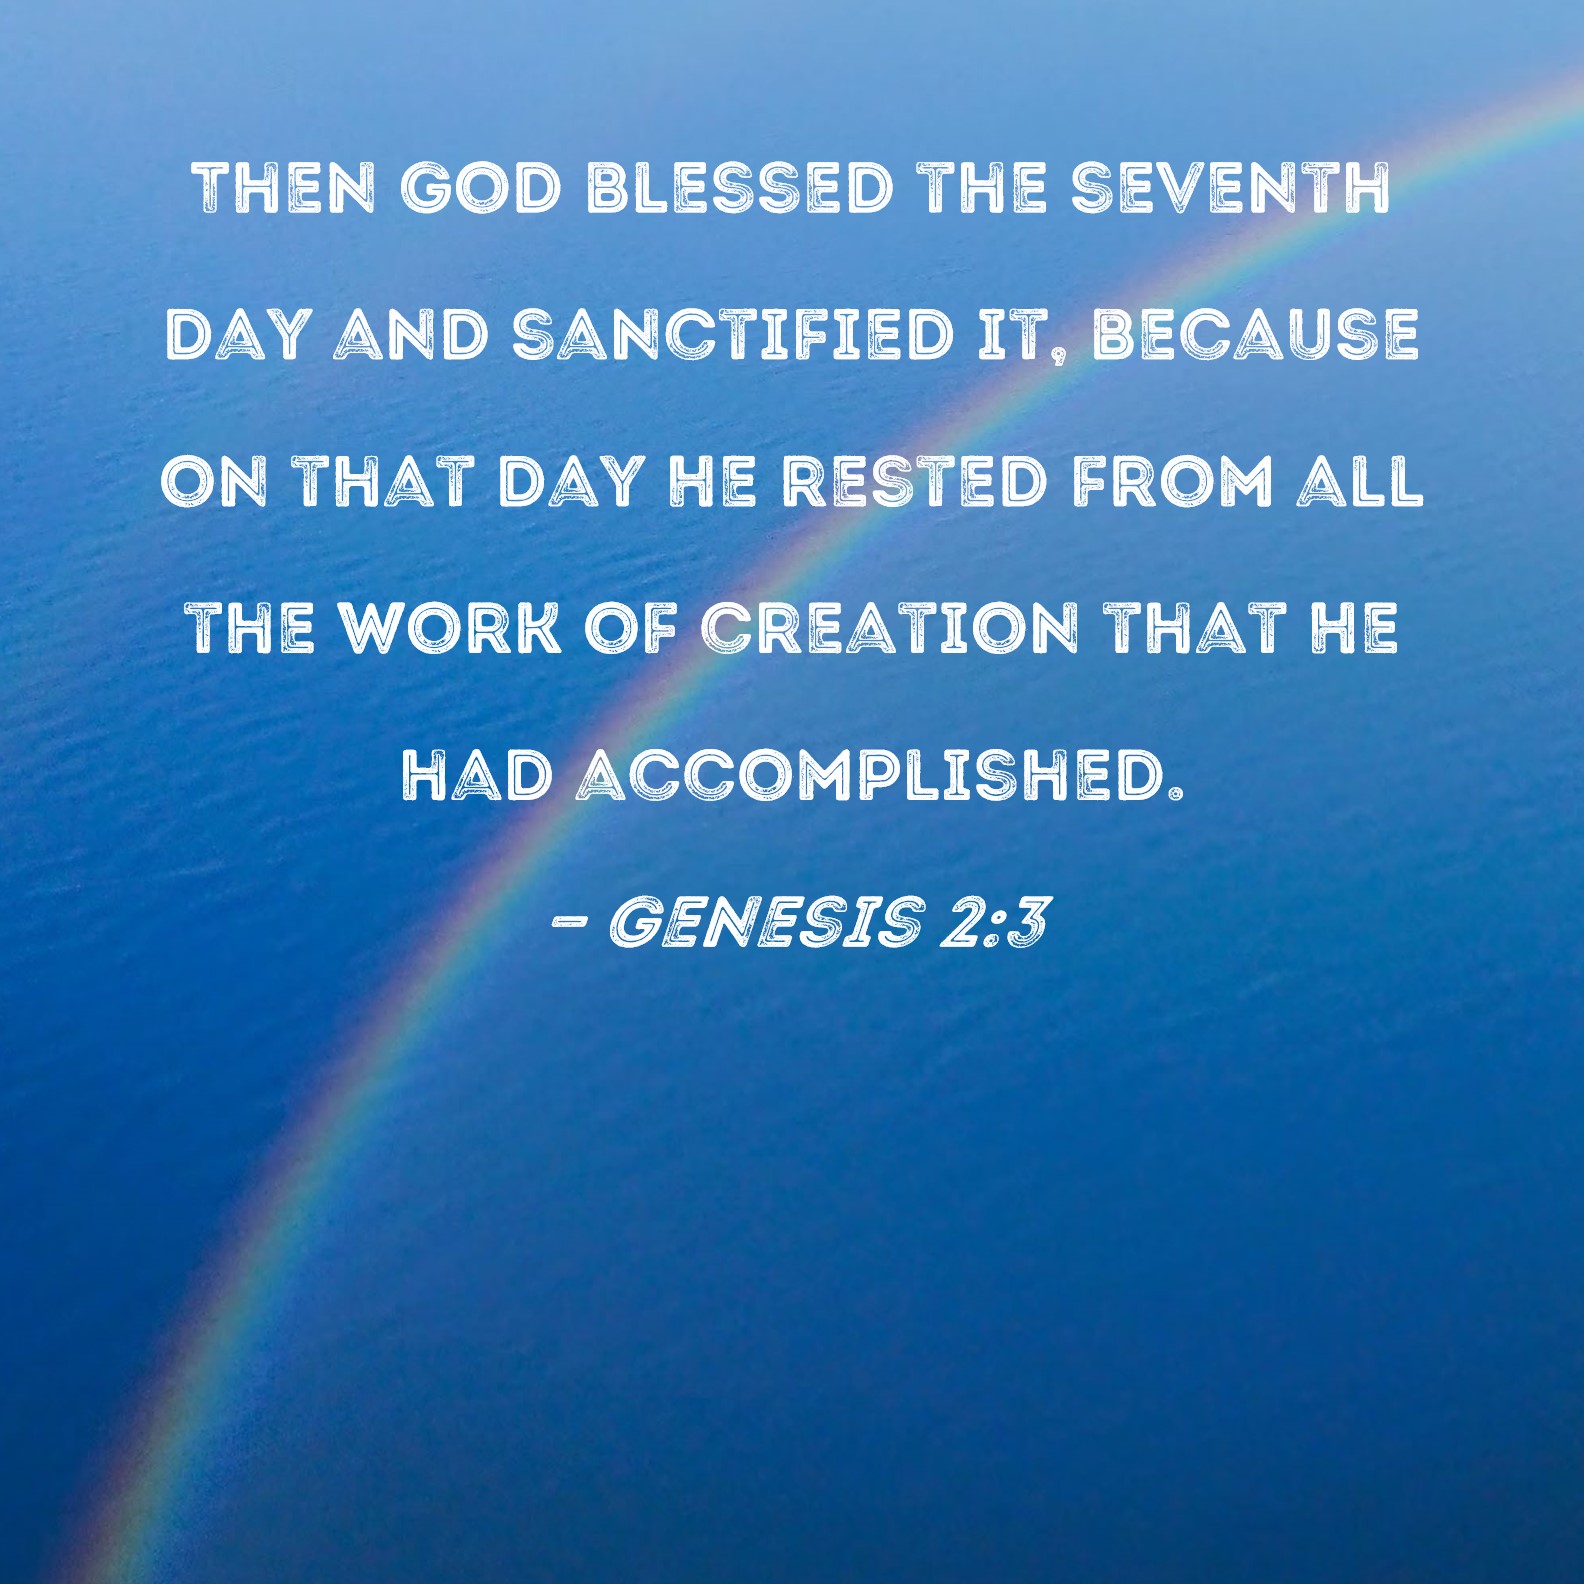 genesis-2-3-then-god-blessed-the-seventh-day-and-sanctified-it-because